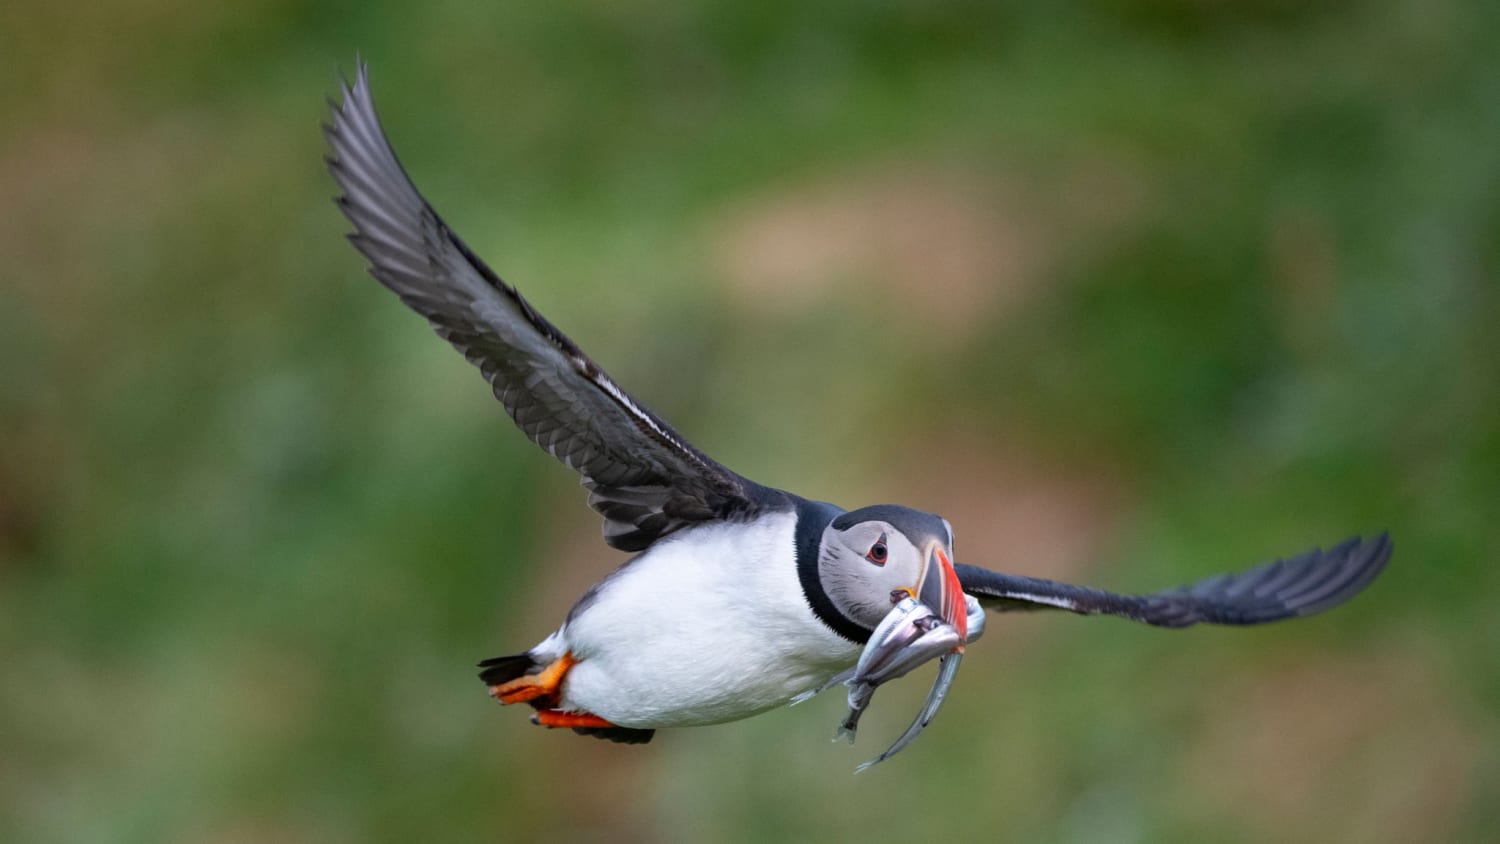 Happy SeabirdSaturday from this hungry puffin!